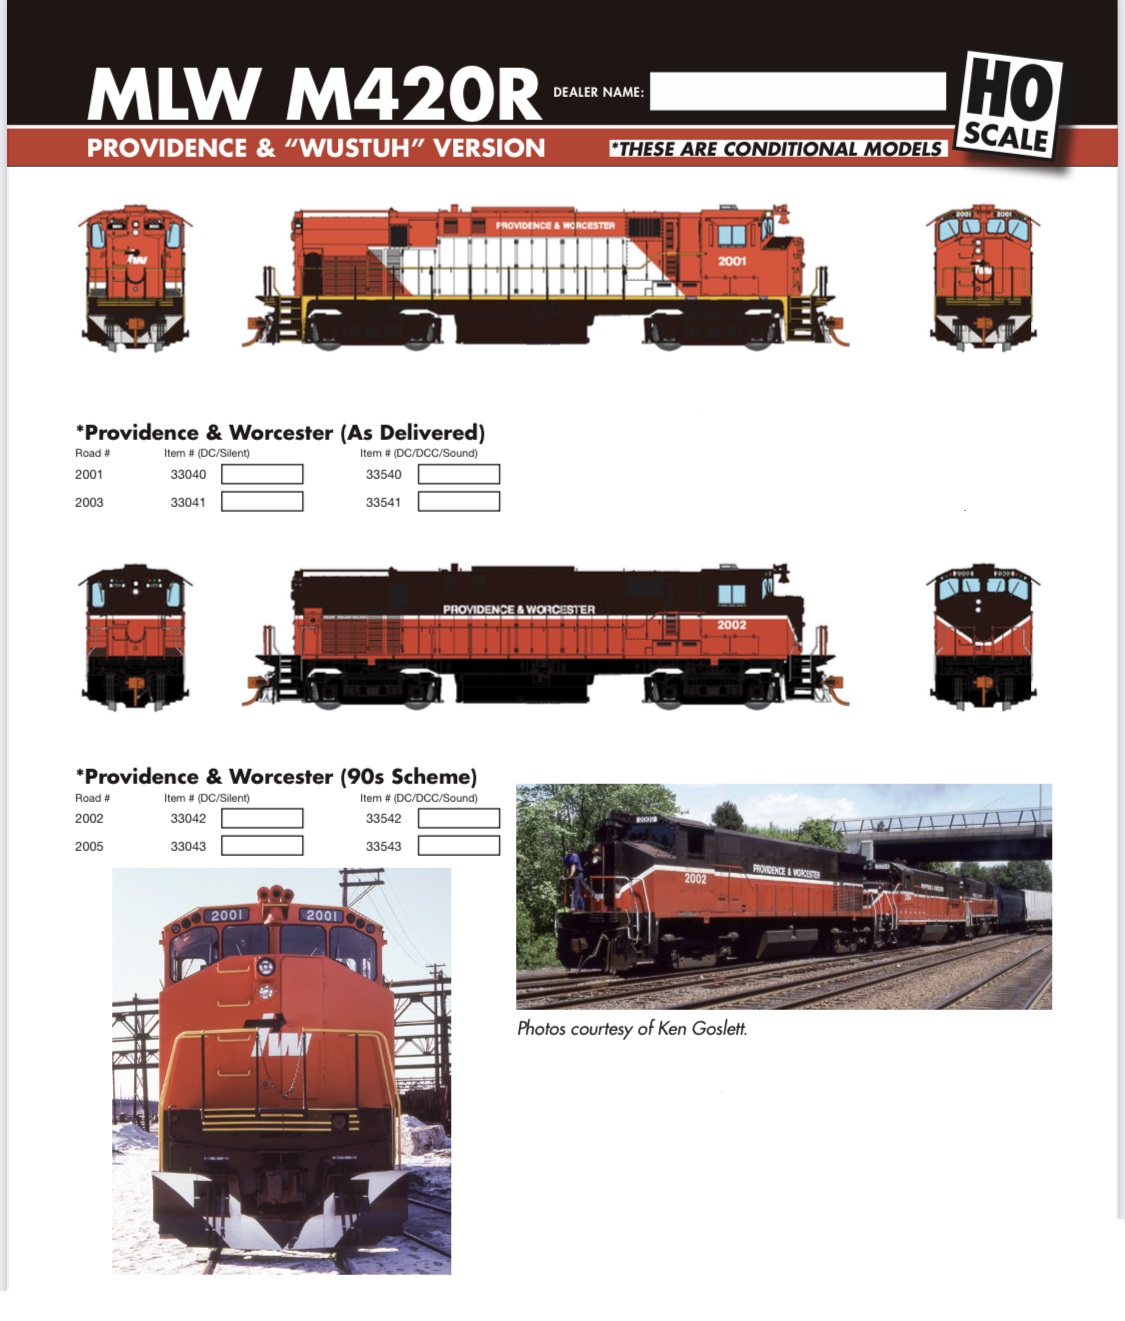 MLW M420 Diesel Locomotives Title Page